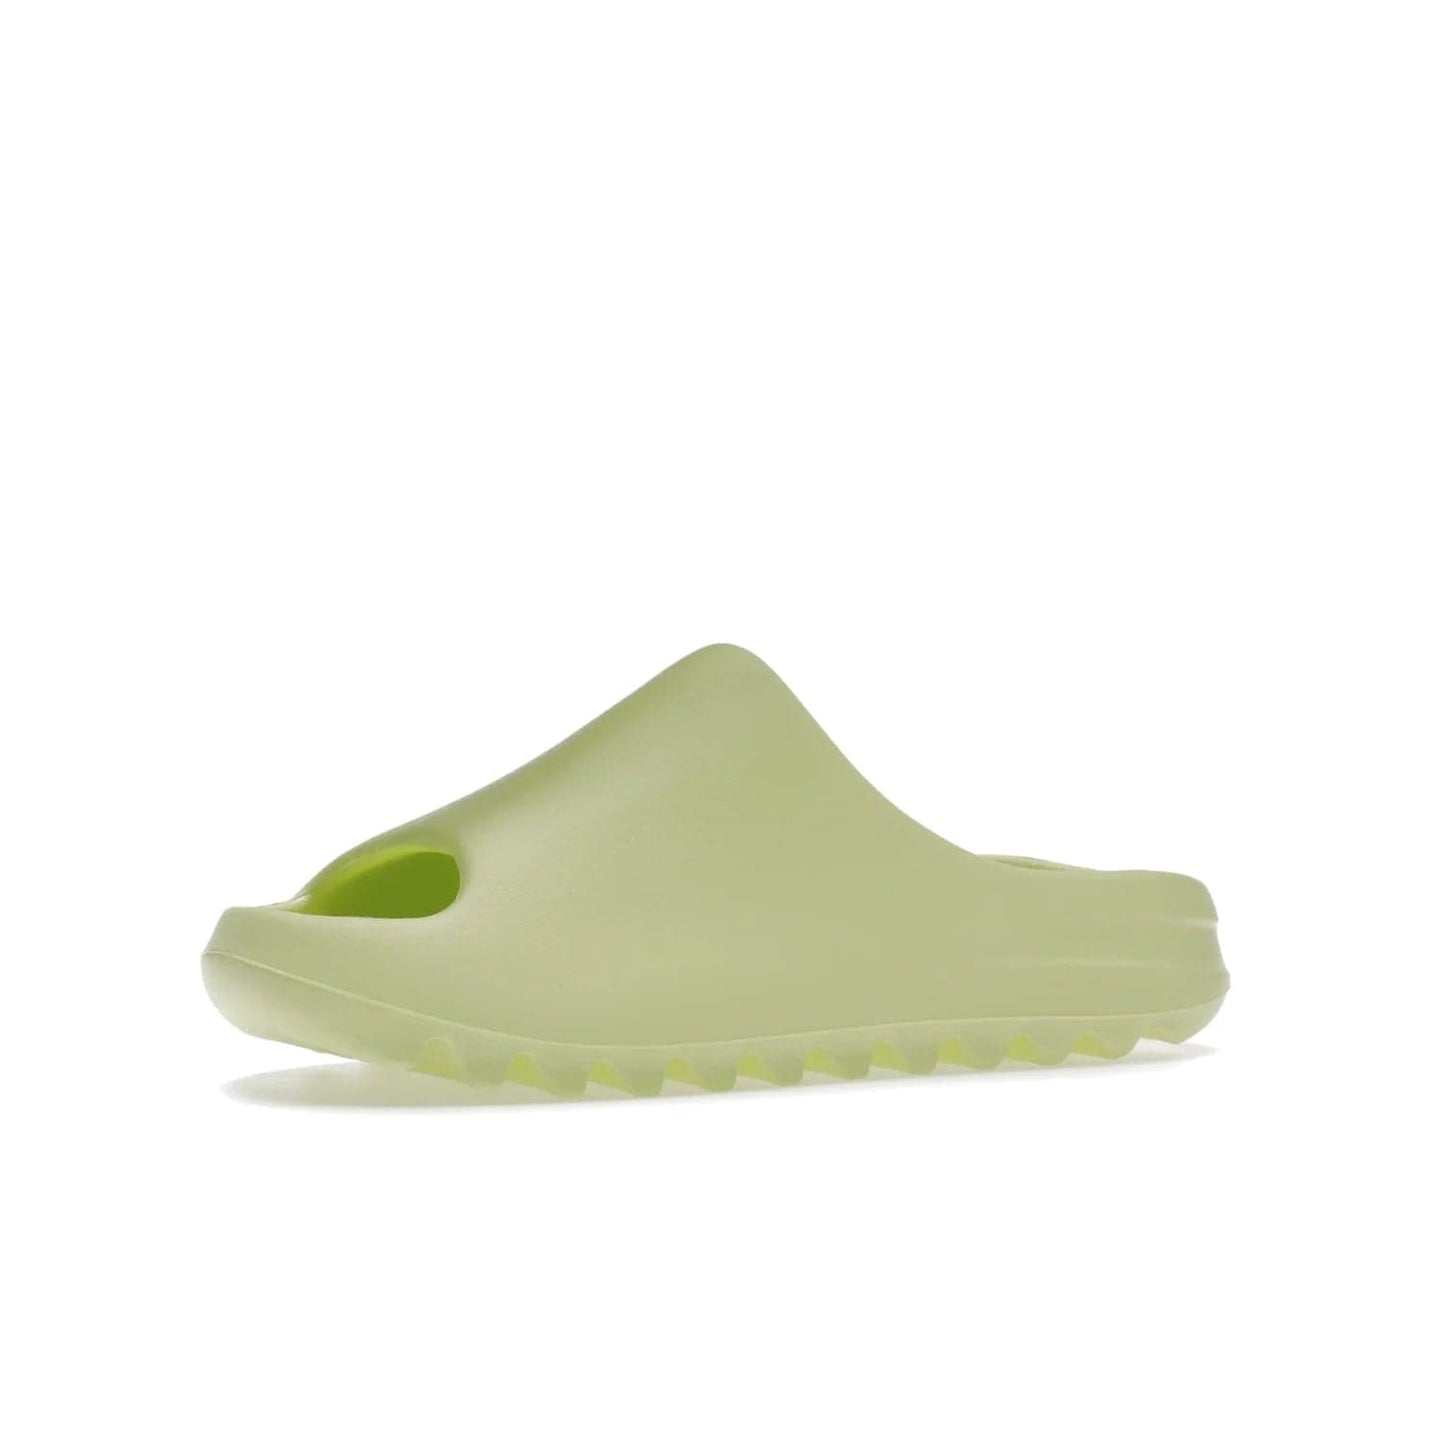 adidas Yeezy Slide Glow Green (2022) (Restock) - Image 16 - Only at www.BallersClubKickz.com - #
Introducing the Adidas Yeezy Slide Glow Green (2022) Restock. Offering ultimate comfort & responsive style with its grooved outsole. Grab your pair on May 2022 for an unforgettable addition to your sneaker collection. US and UK sizes the same.